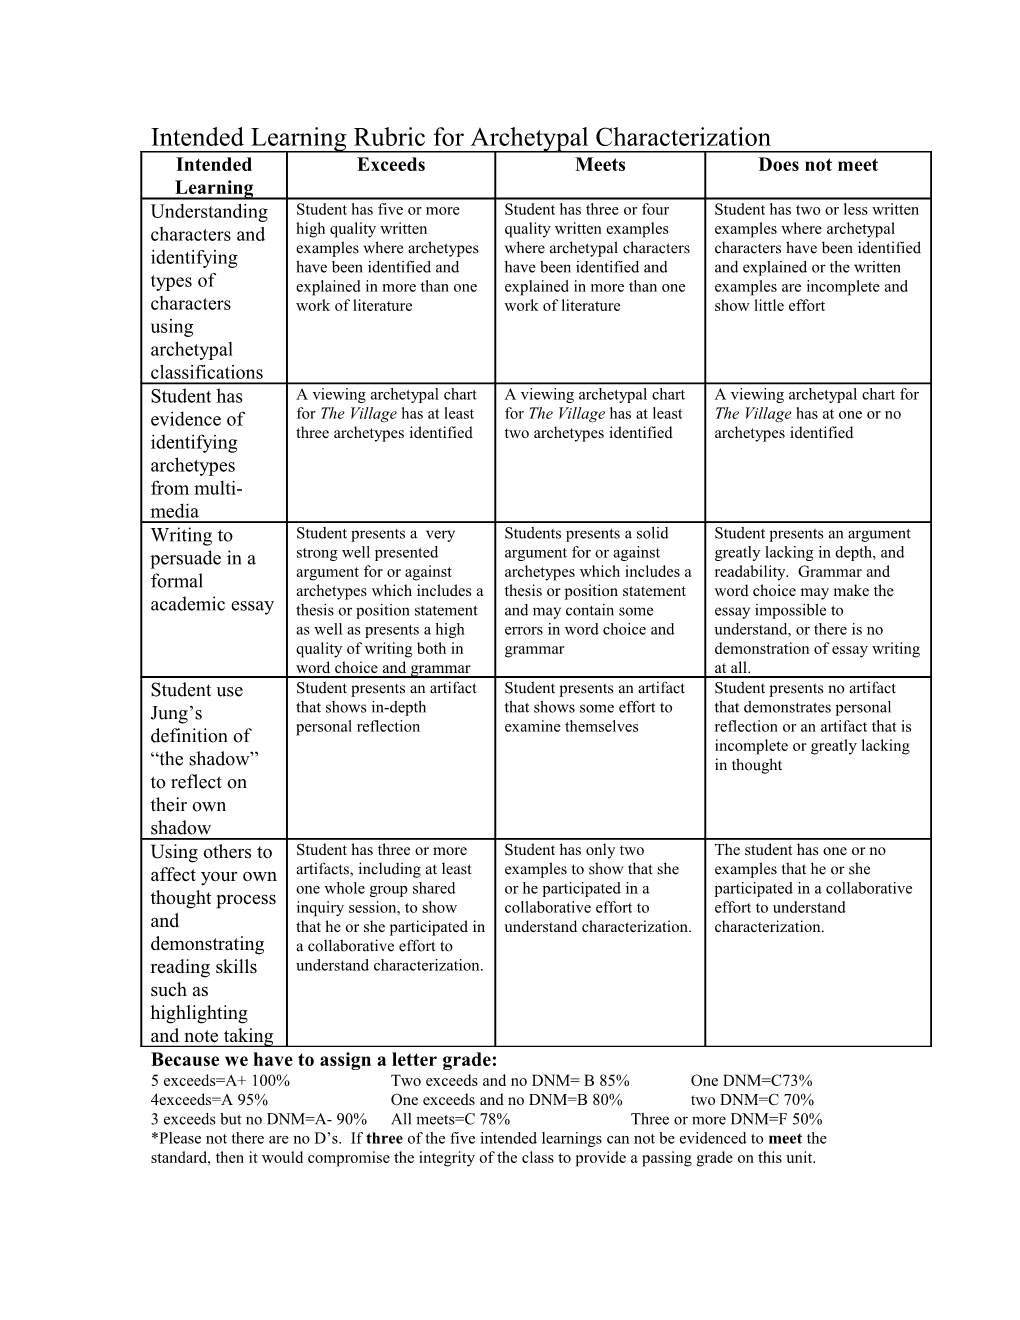 Intended Learning Rubric for Archetypal Characterization